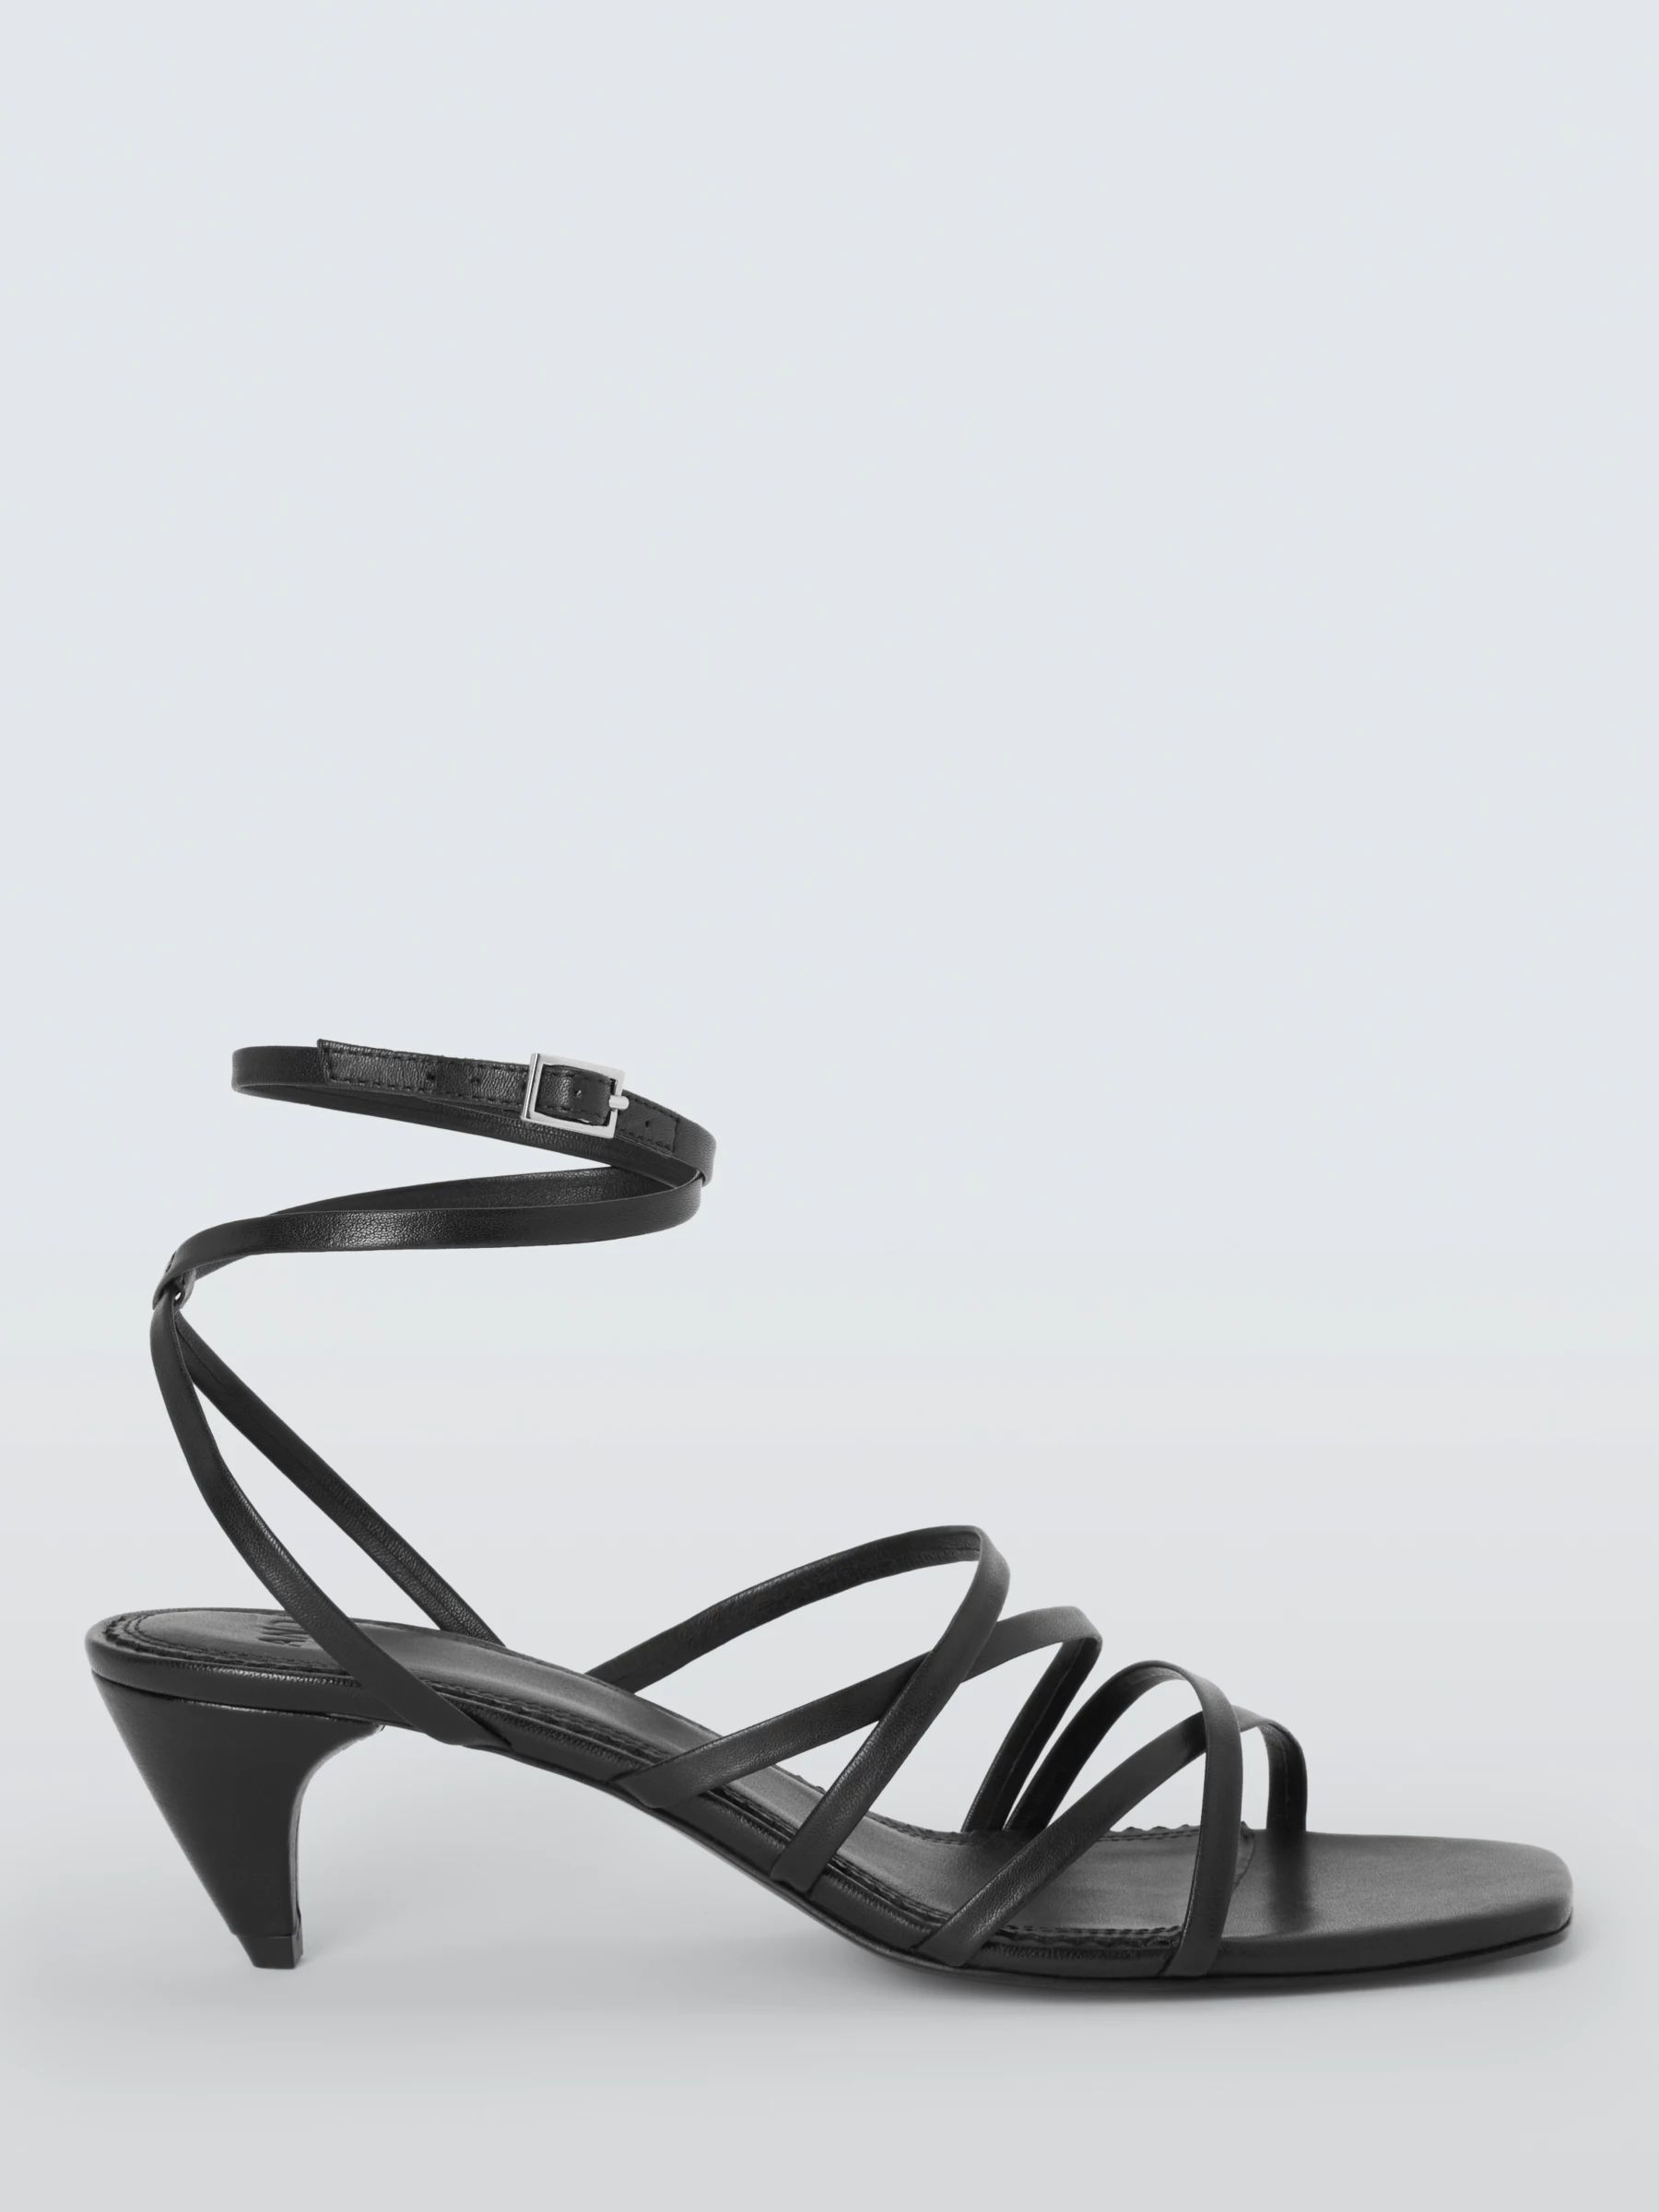 AND/OR Iris Leather Feature Heel Strappy Low Sandals, Black | John Lewis (UK)